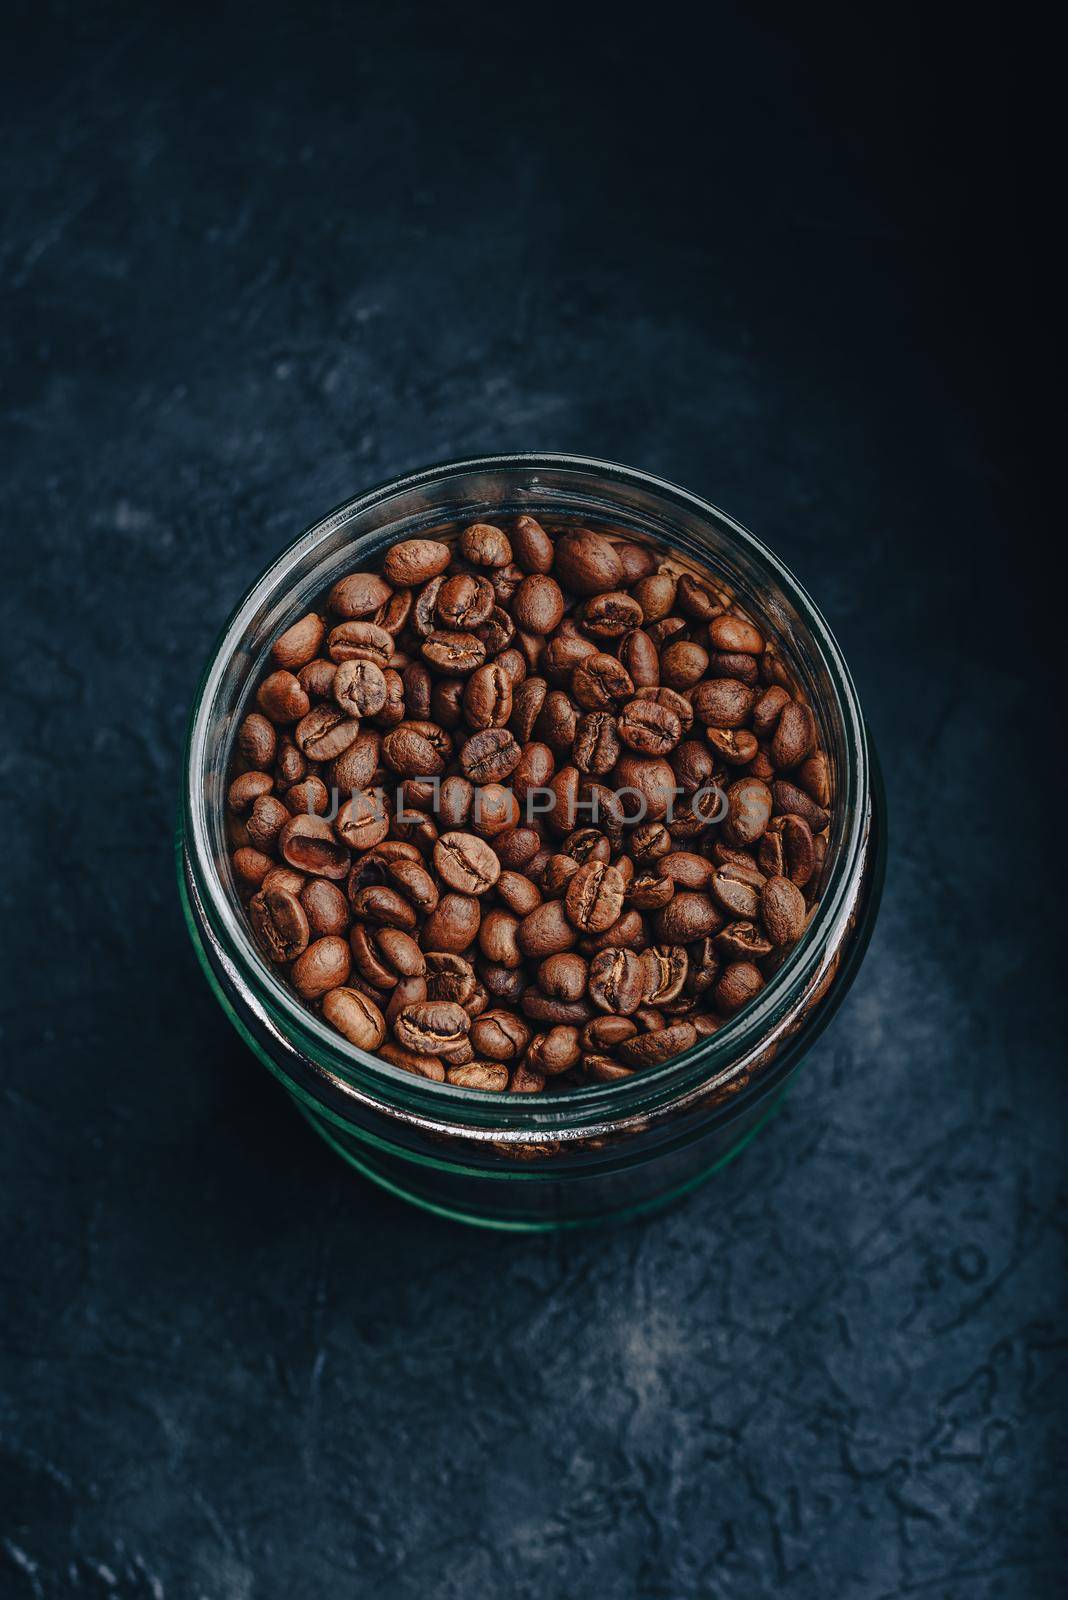 Above View of Coffee Beans inside a Jar by Seva_blsv